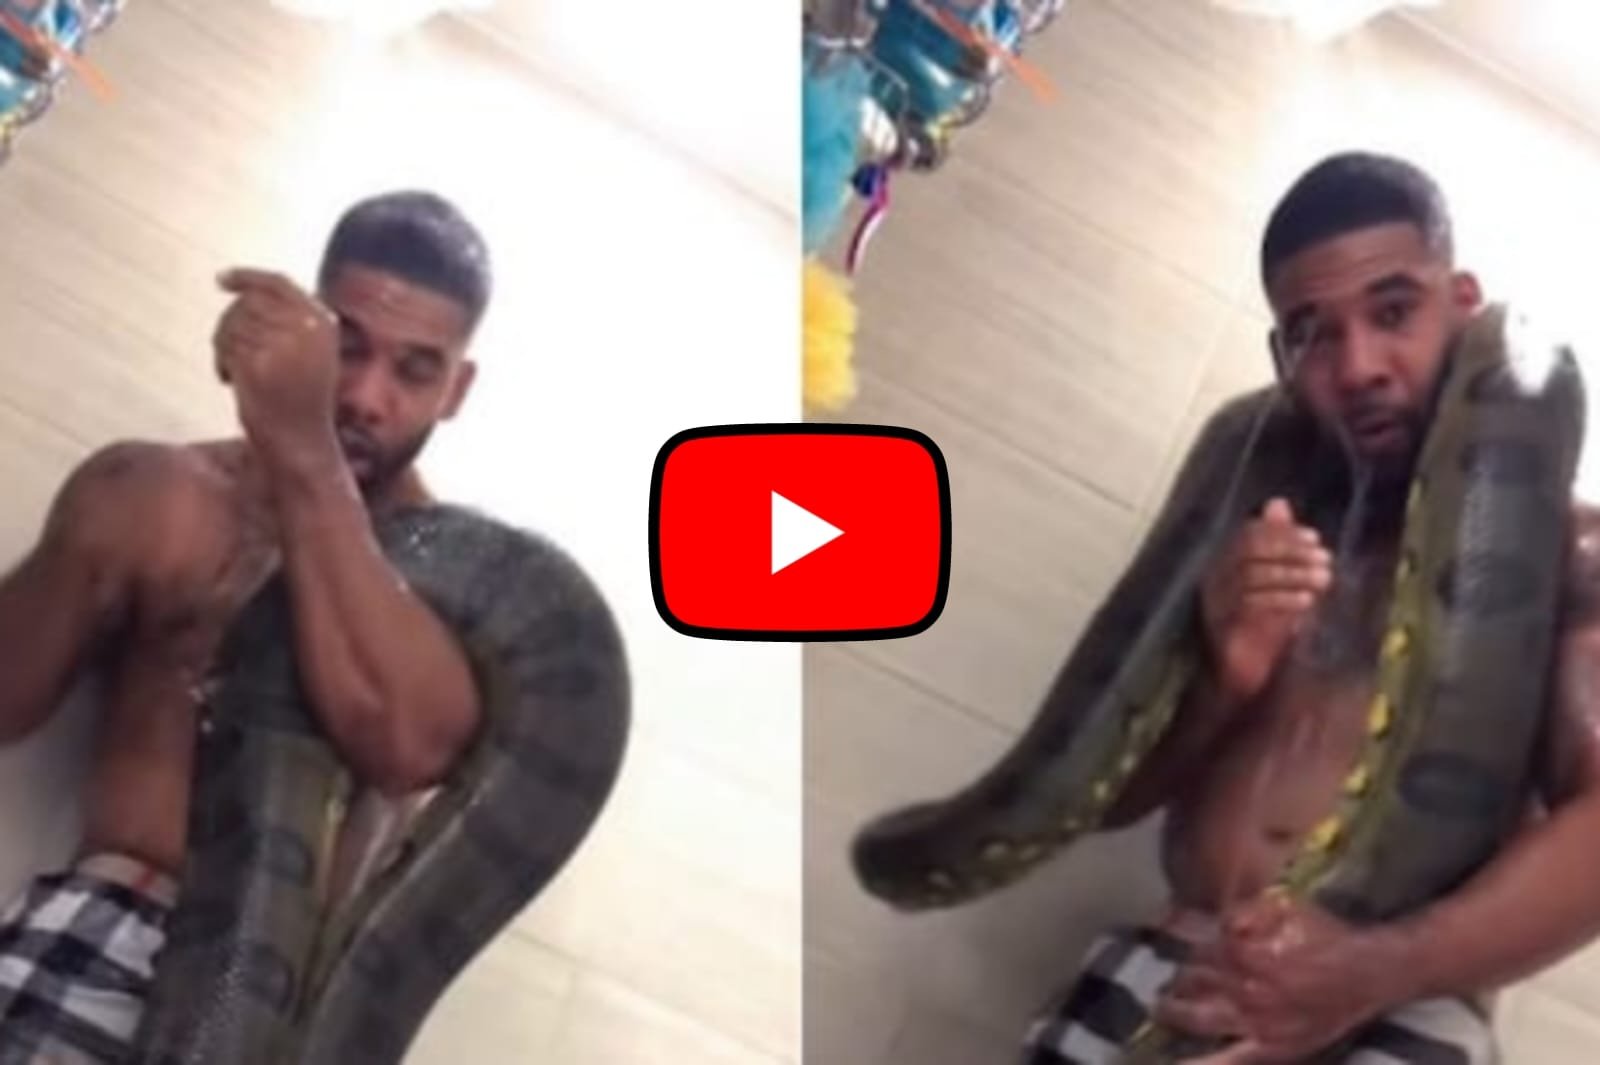 Anaconda Ka Video: Video of a man bathing in the bathroom with a giant anaconda snake goes viral